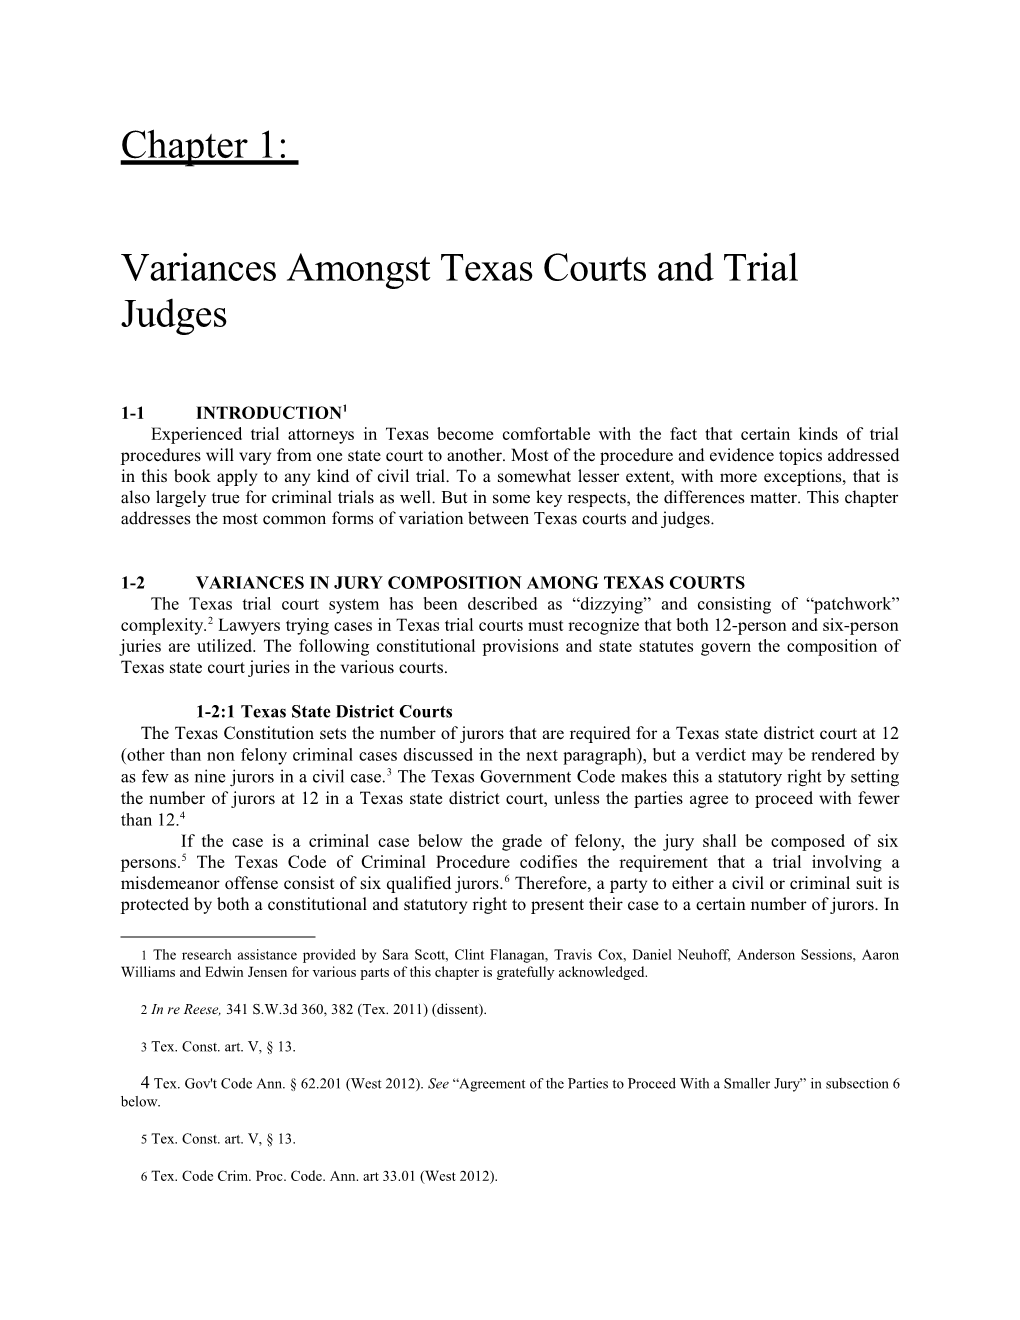 Variances Amongst Texas Courts and Trial Judges